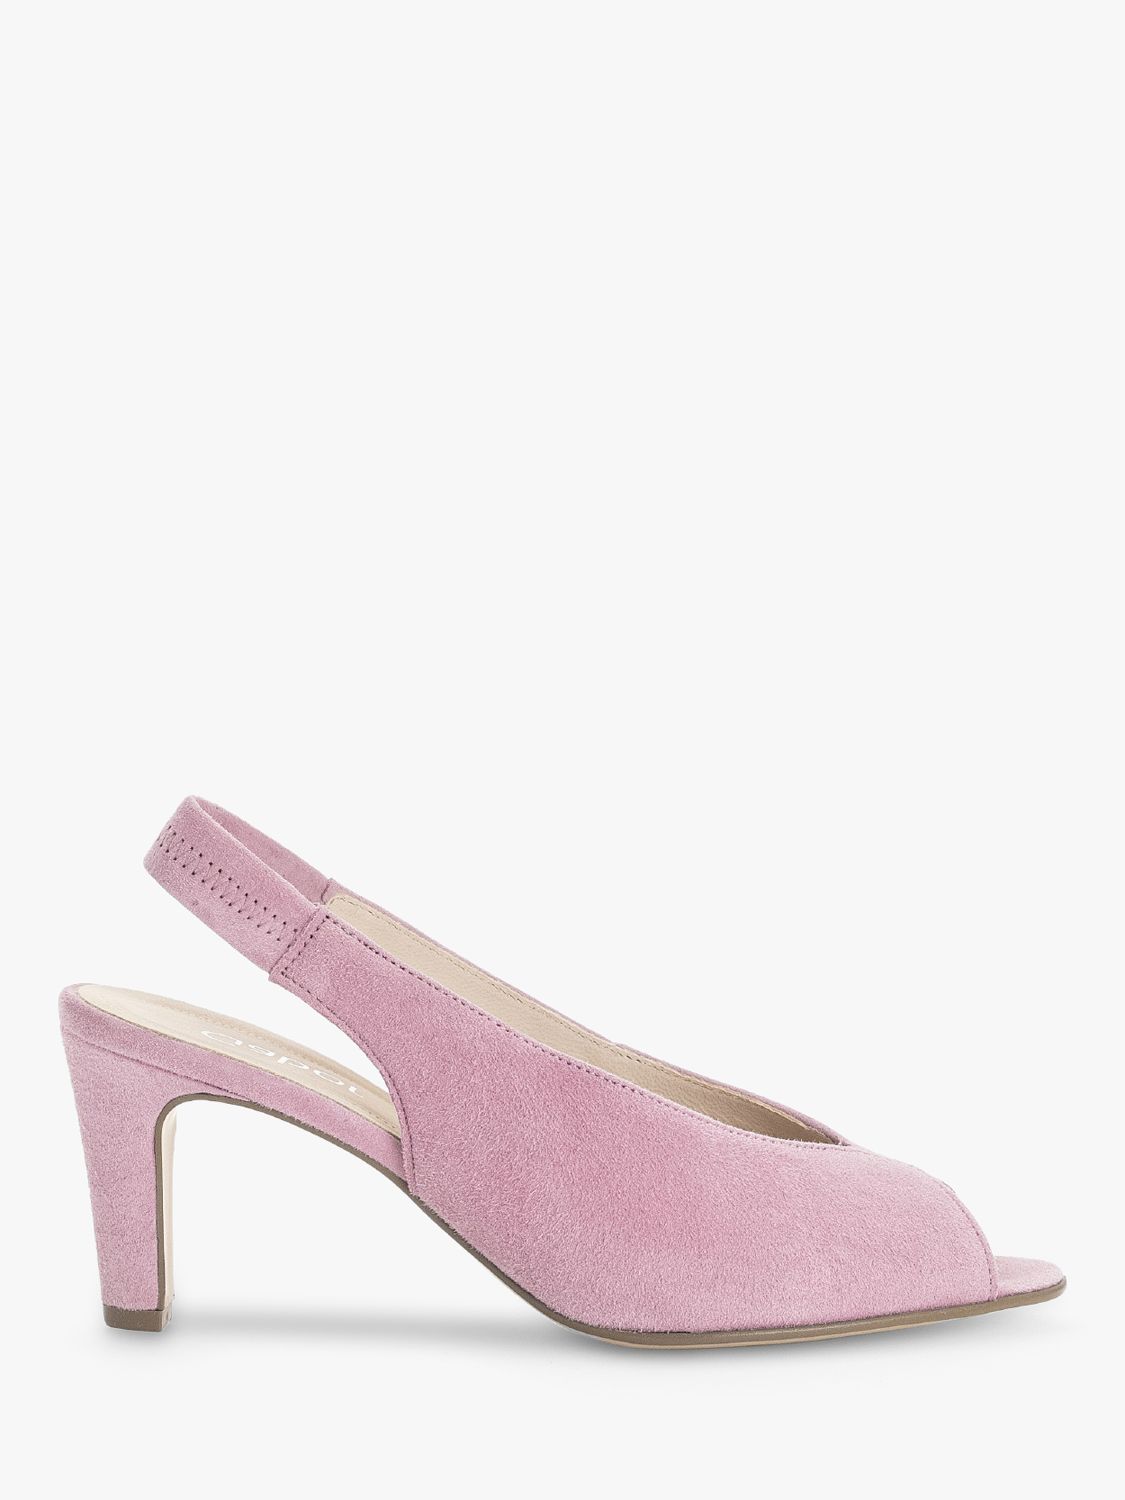 Gabor Eternity Suede Peep Toe Court Shoes, Soft Pink, 6.5